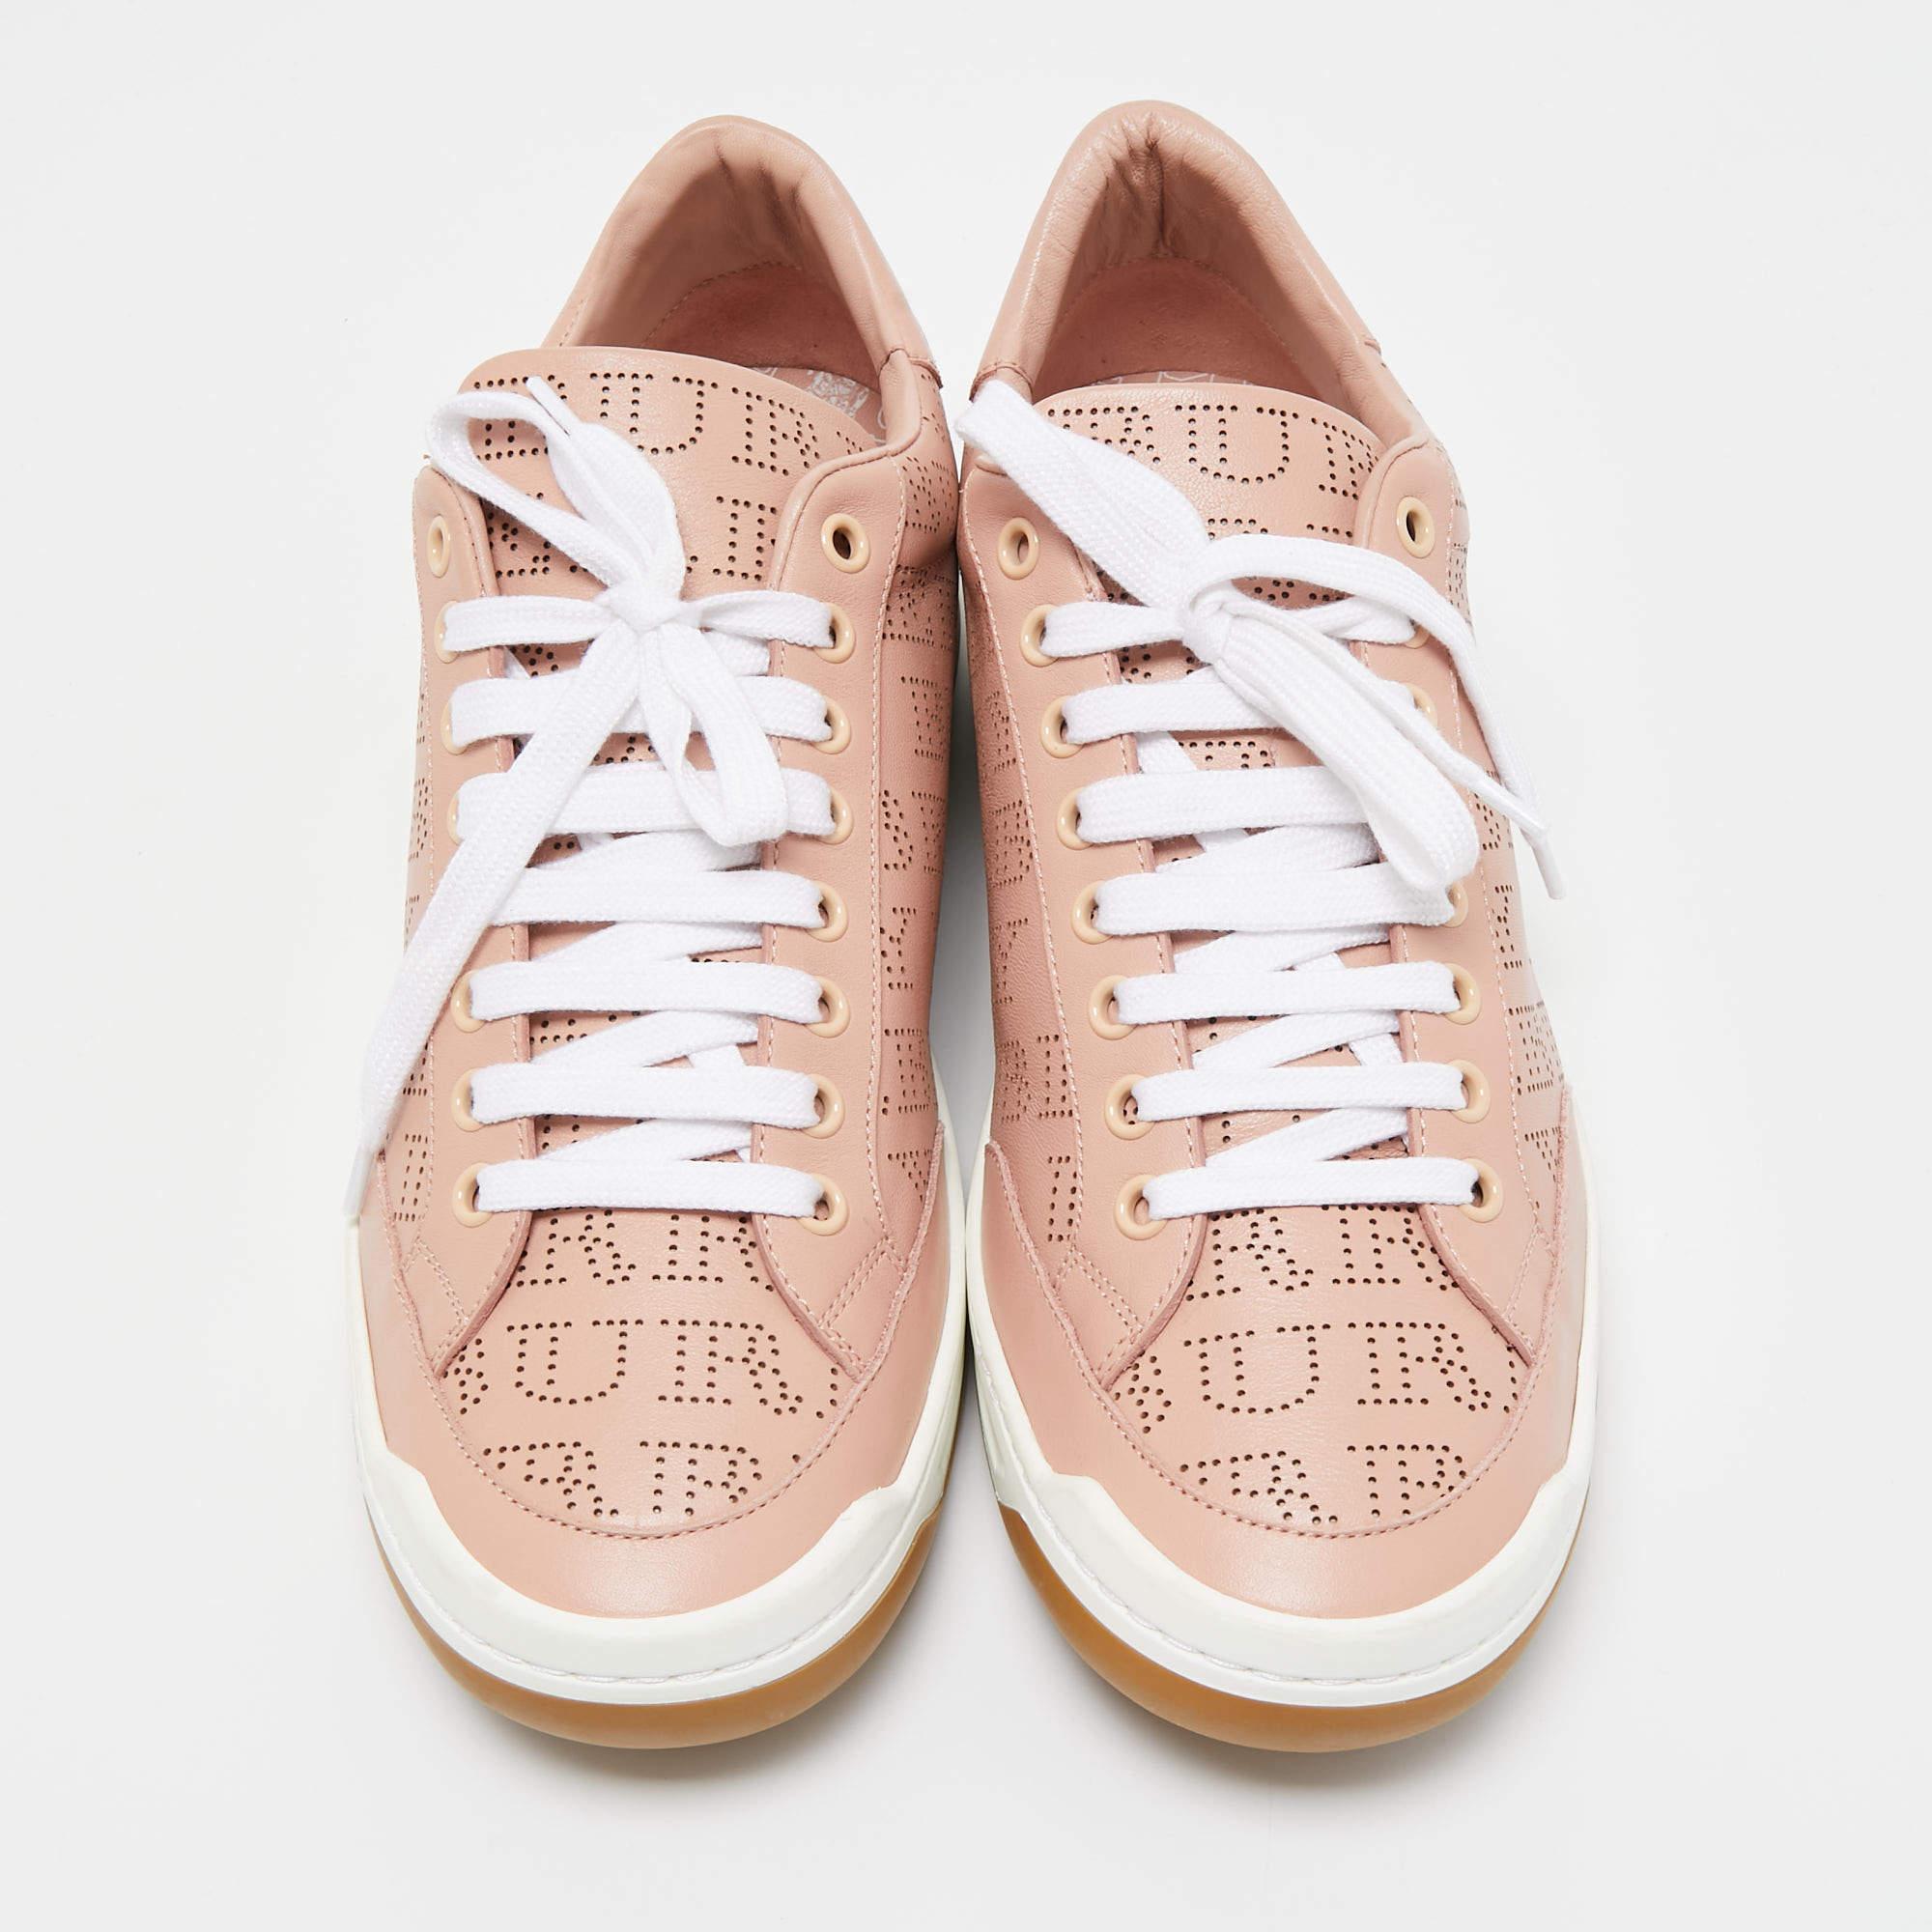 Elevate your footwear game with these Burberry sneakers. Combining high-end aesthetics and unmatched comfort, these sneakers are a symbol of modern luxury and impeccable taste.

Includes: Original Box

